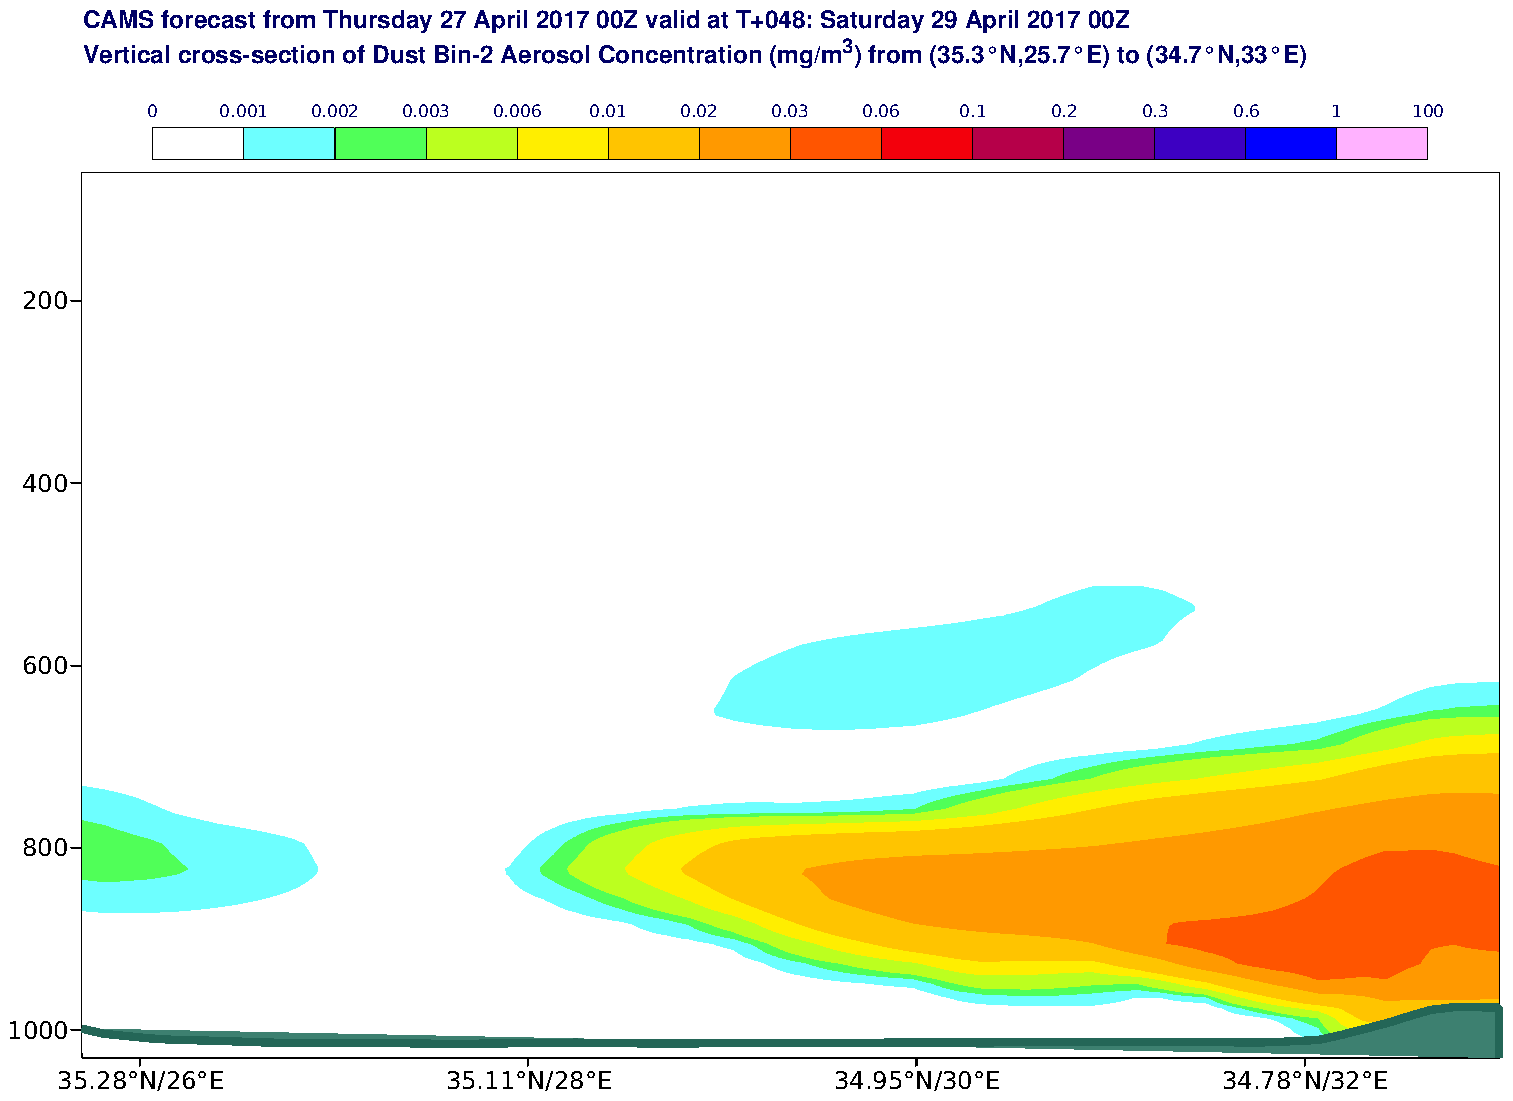 Vertical cross-section of Dust Bin-2 Aerosol Concentration (mg/m3) valid at T48 - 2017-04-29 00:00